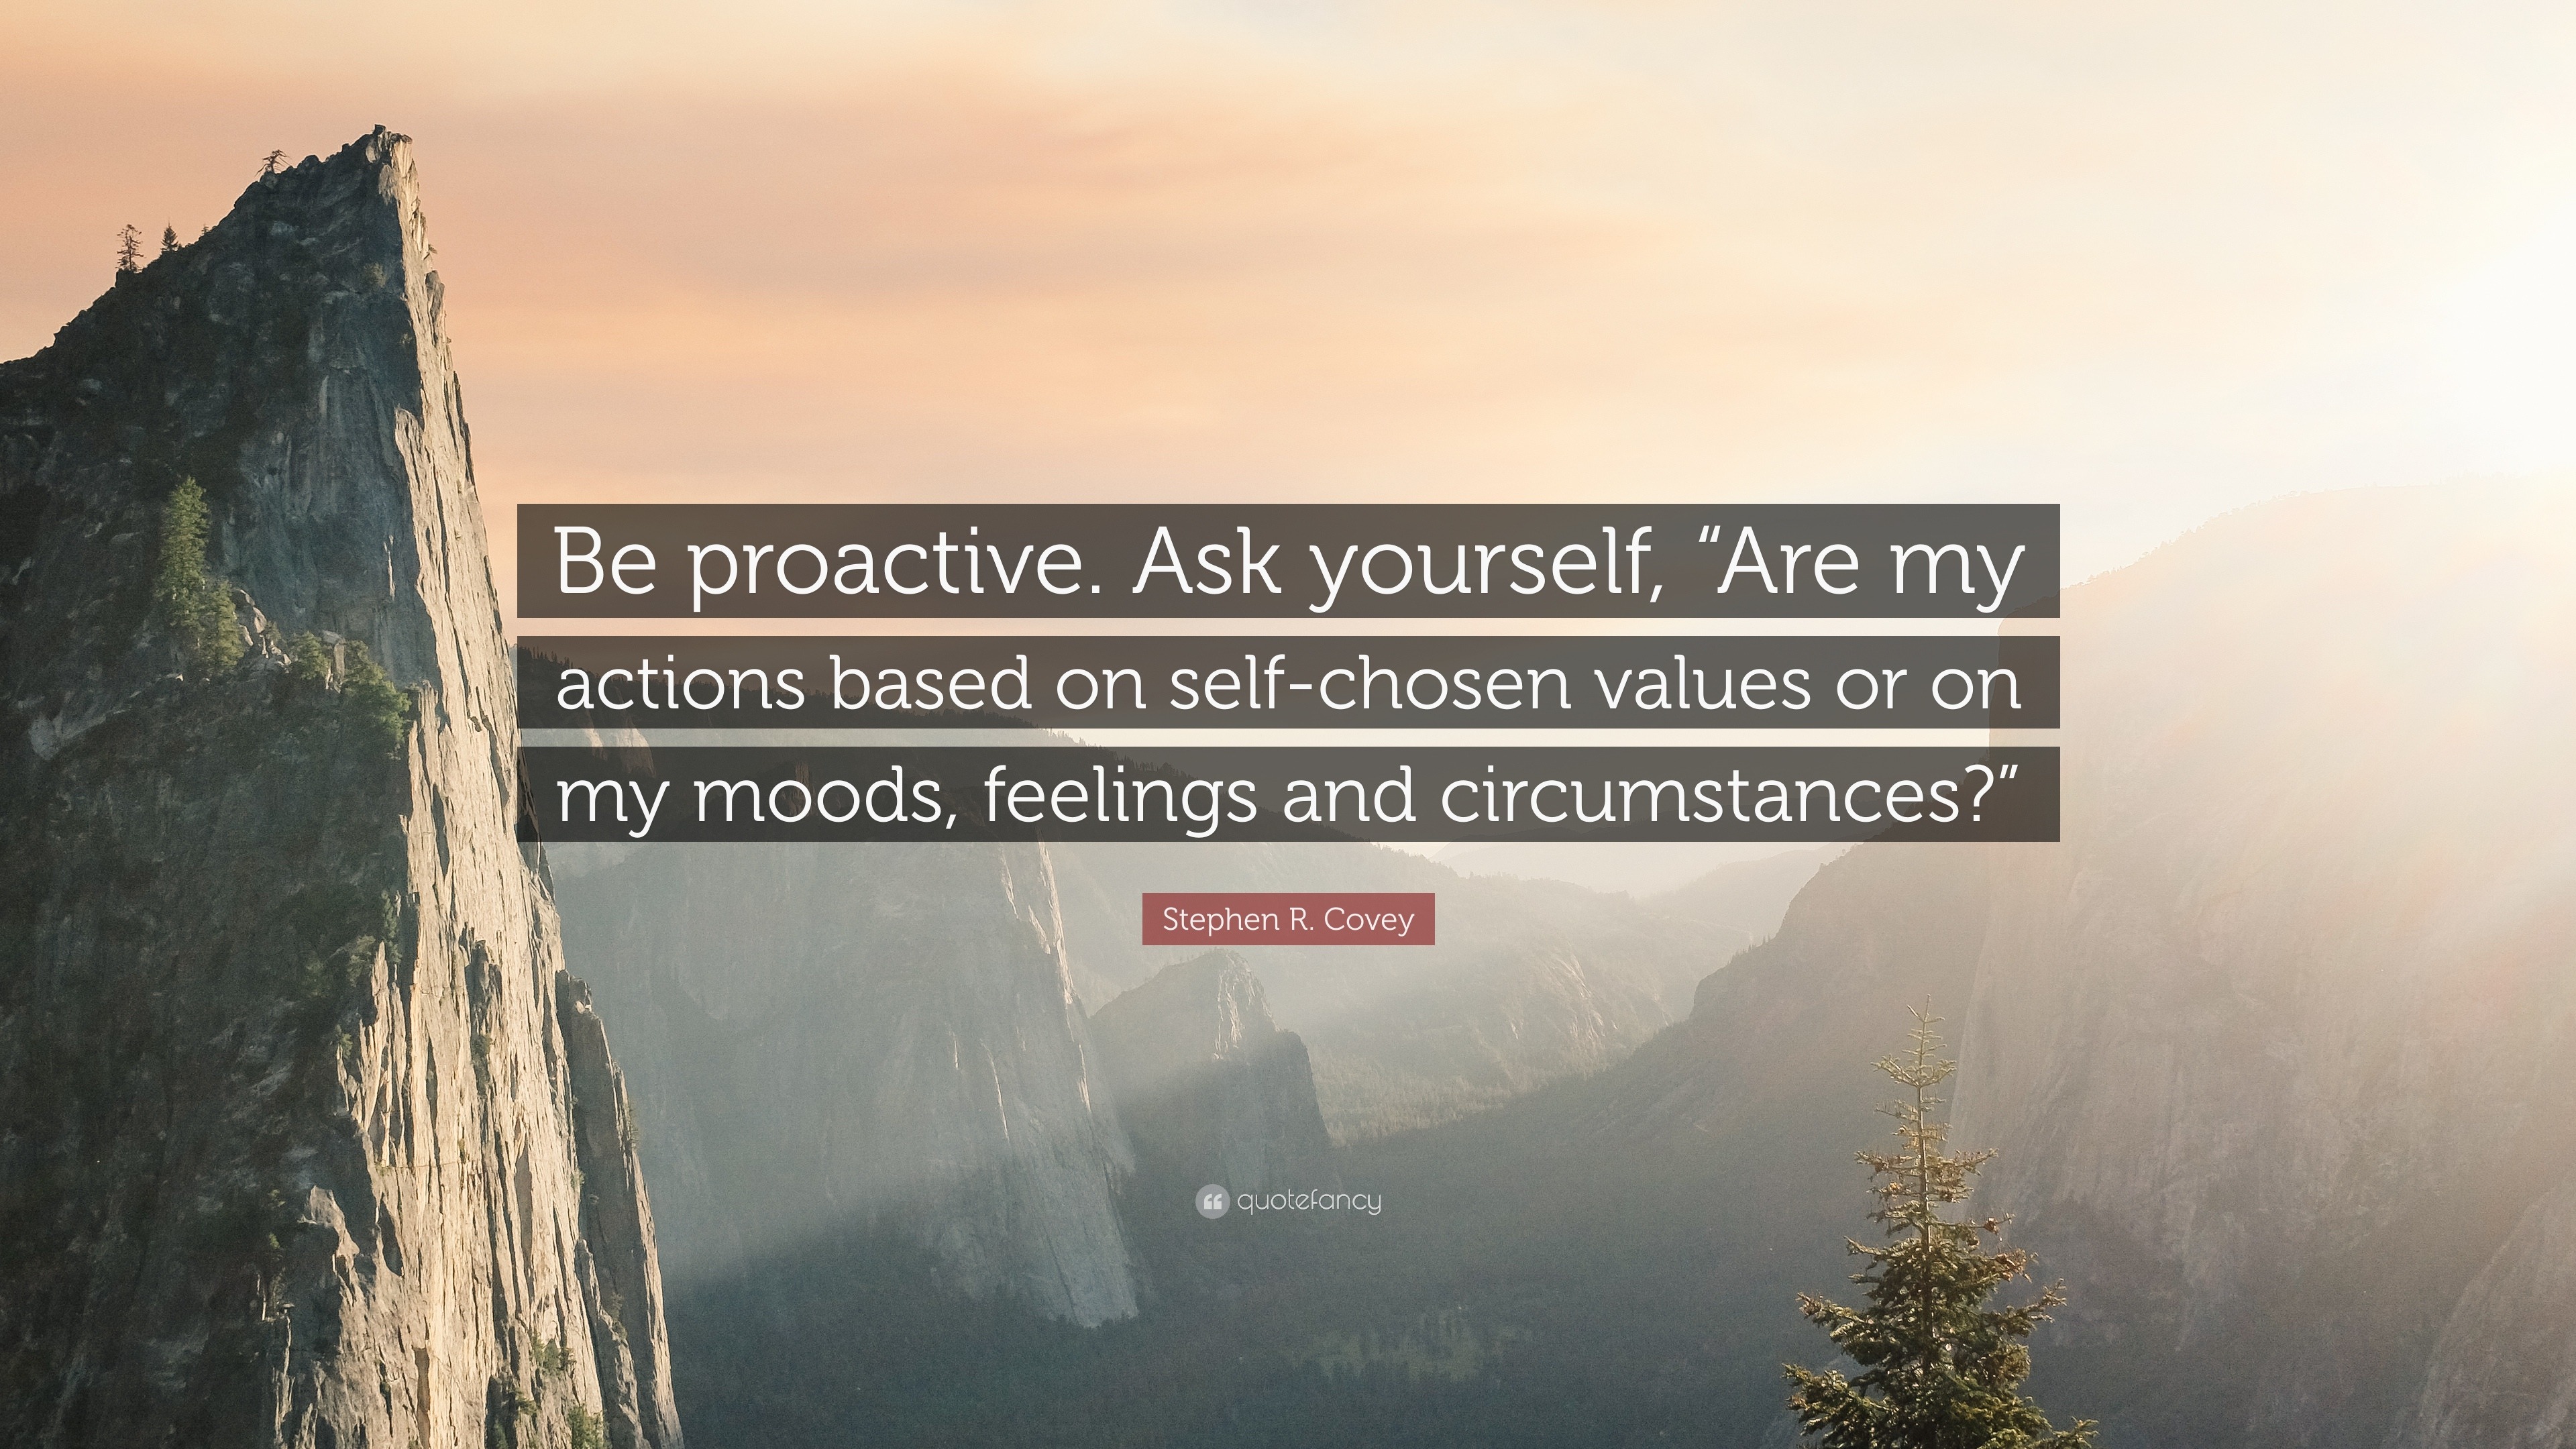 Stephen R Covey Quote Be Proactive Ask Yourself Are My Actions Based On Self Chosen Values